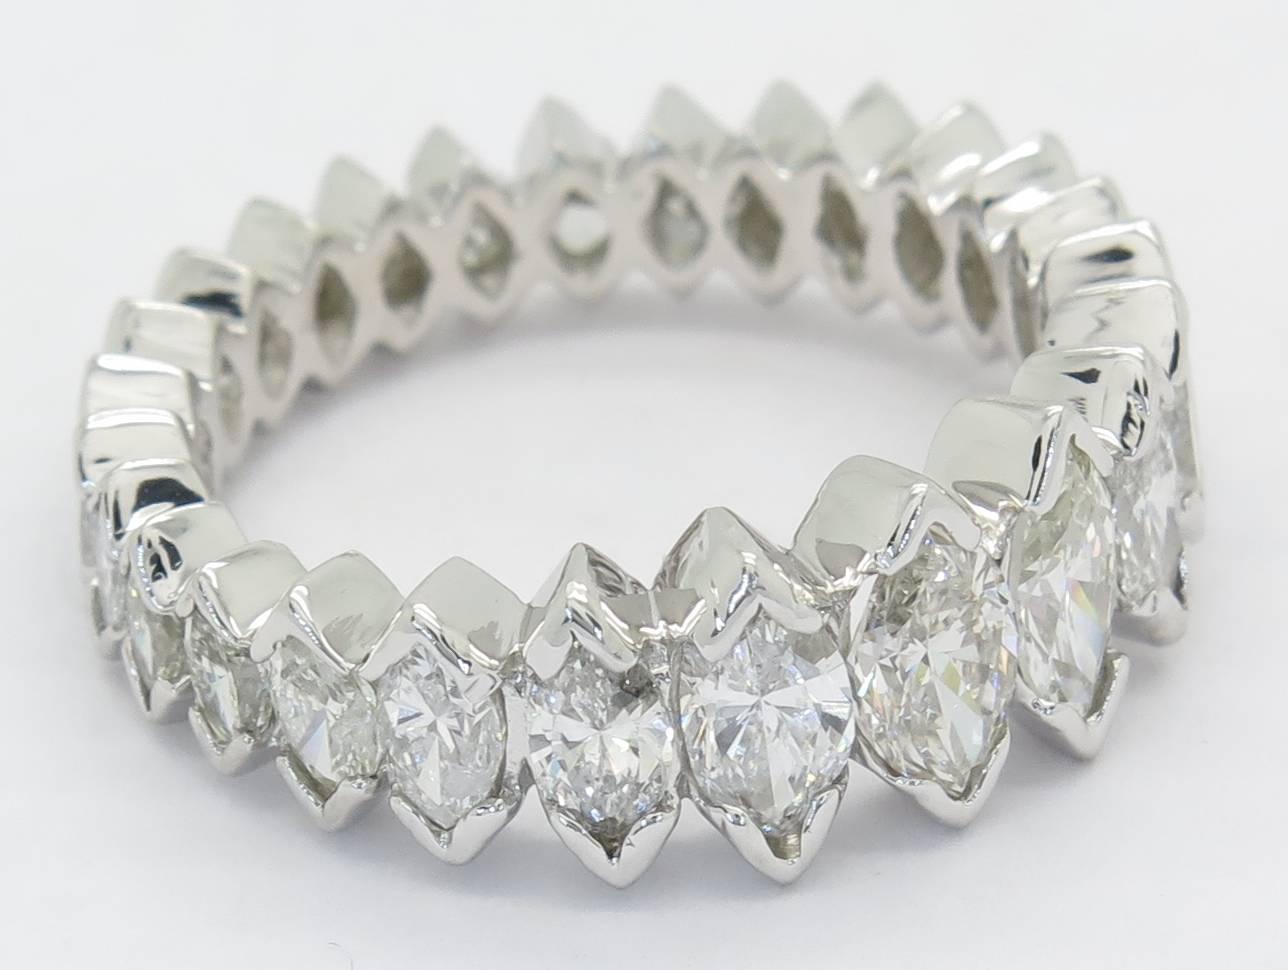 The band features 26 marquise cut diamonds weighing in total 3.00 carats. The diamodns are G-K in color range and SI1 in clarity. The diamonds are V-prong set in an eternity style. This stunning ring is a size 6 and cannot be sized. The band is